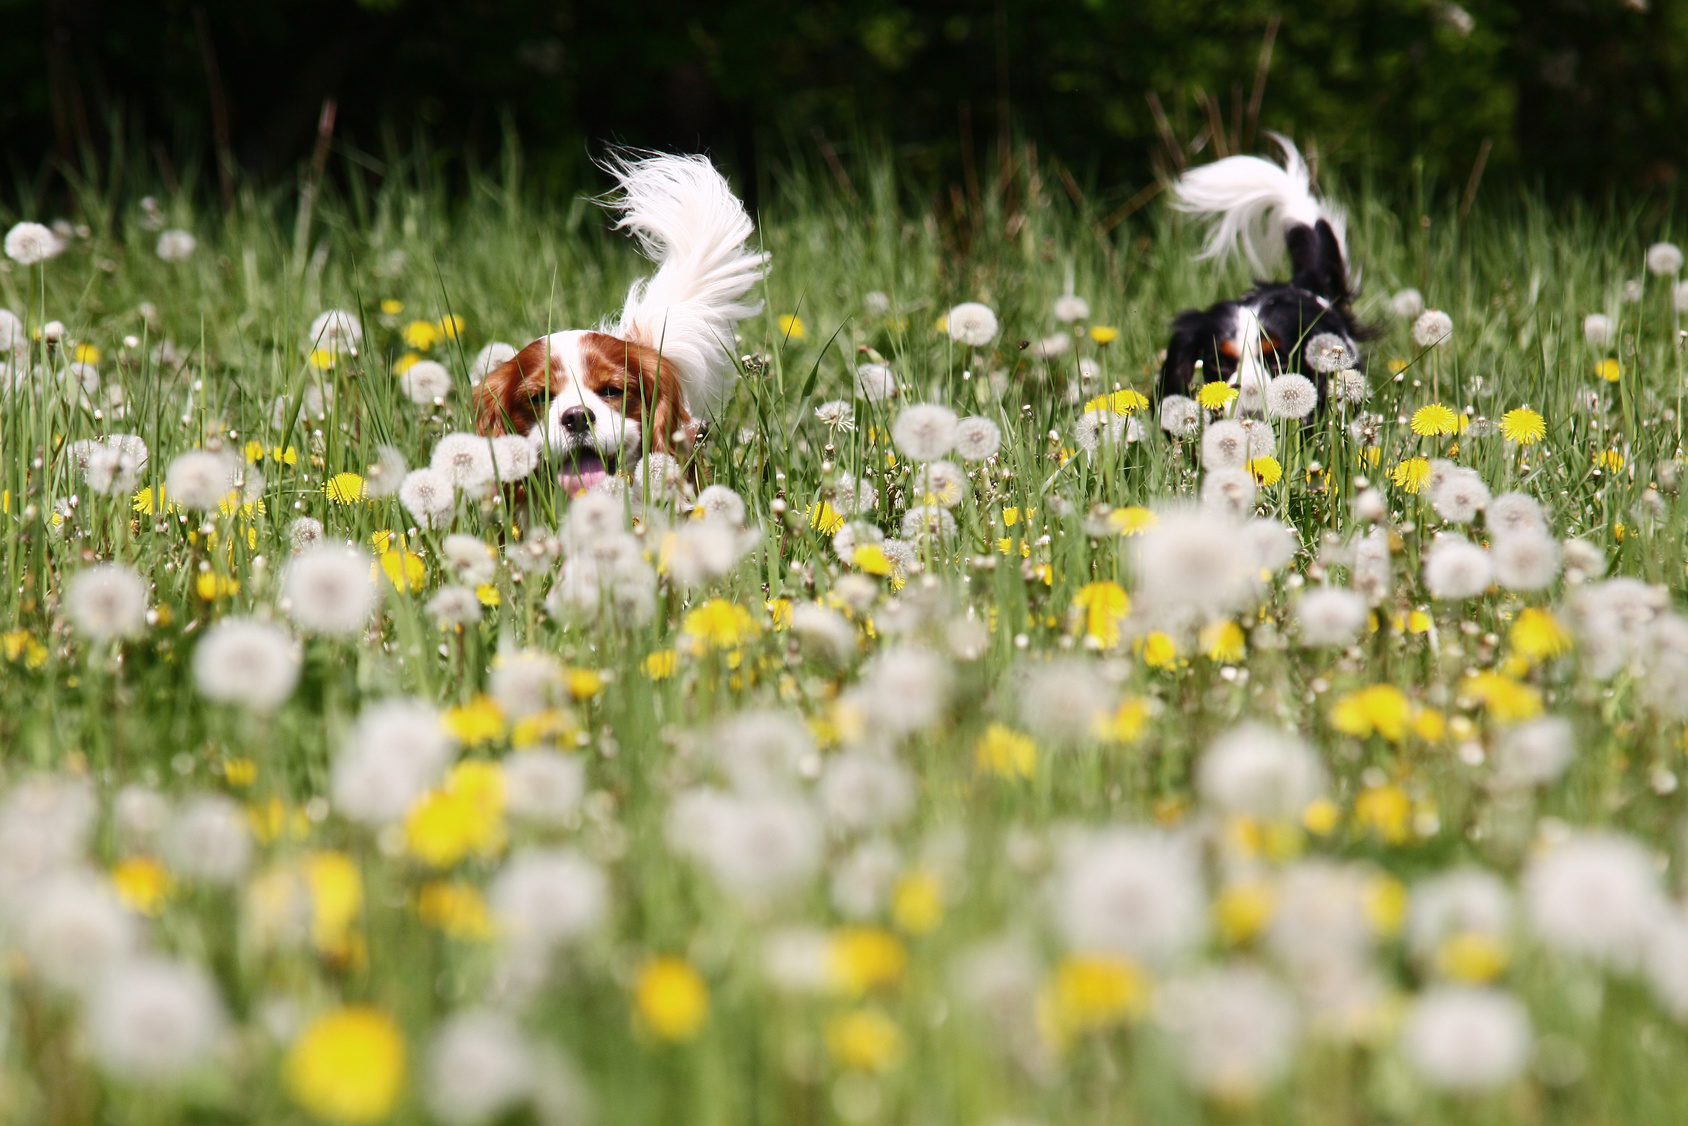 dog running on medow with dandelions and blowballs